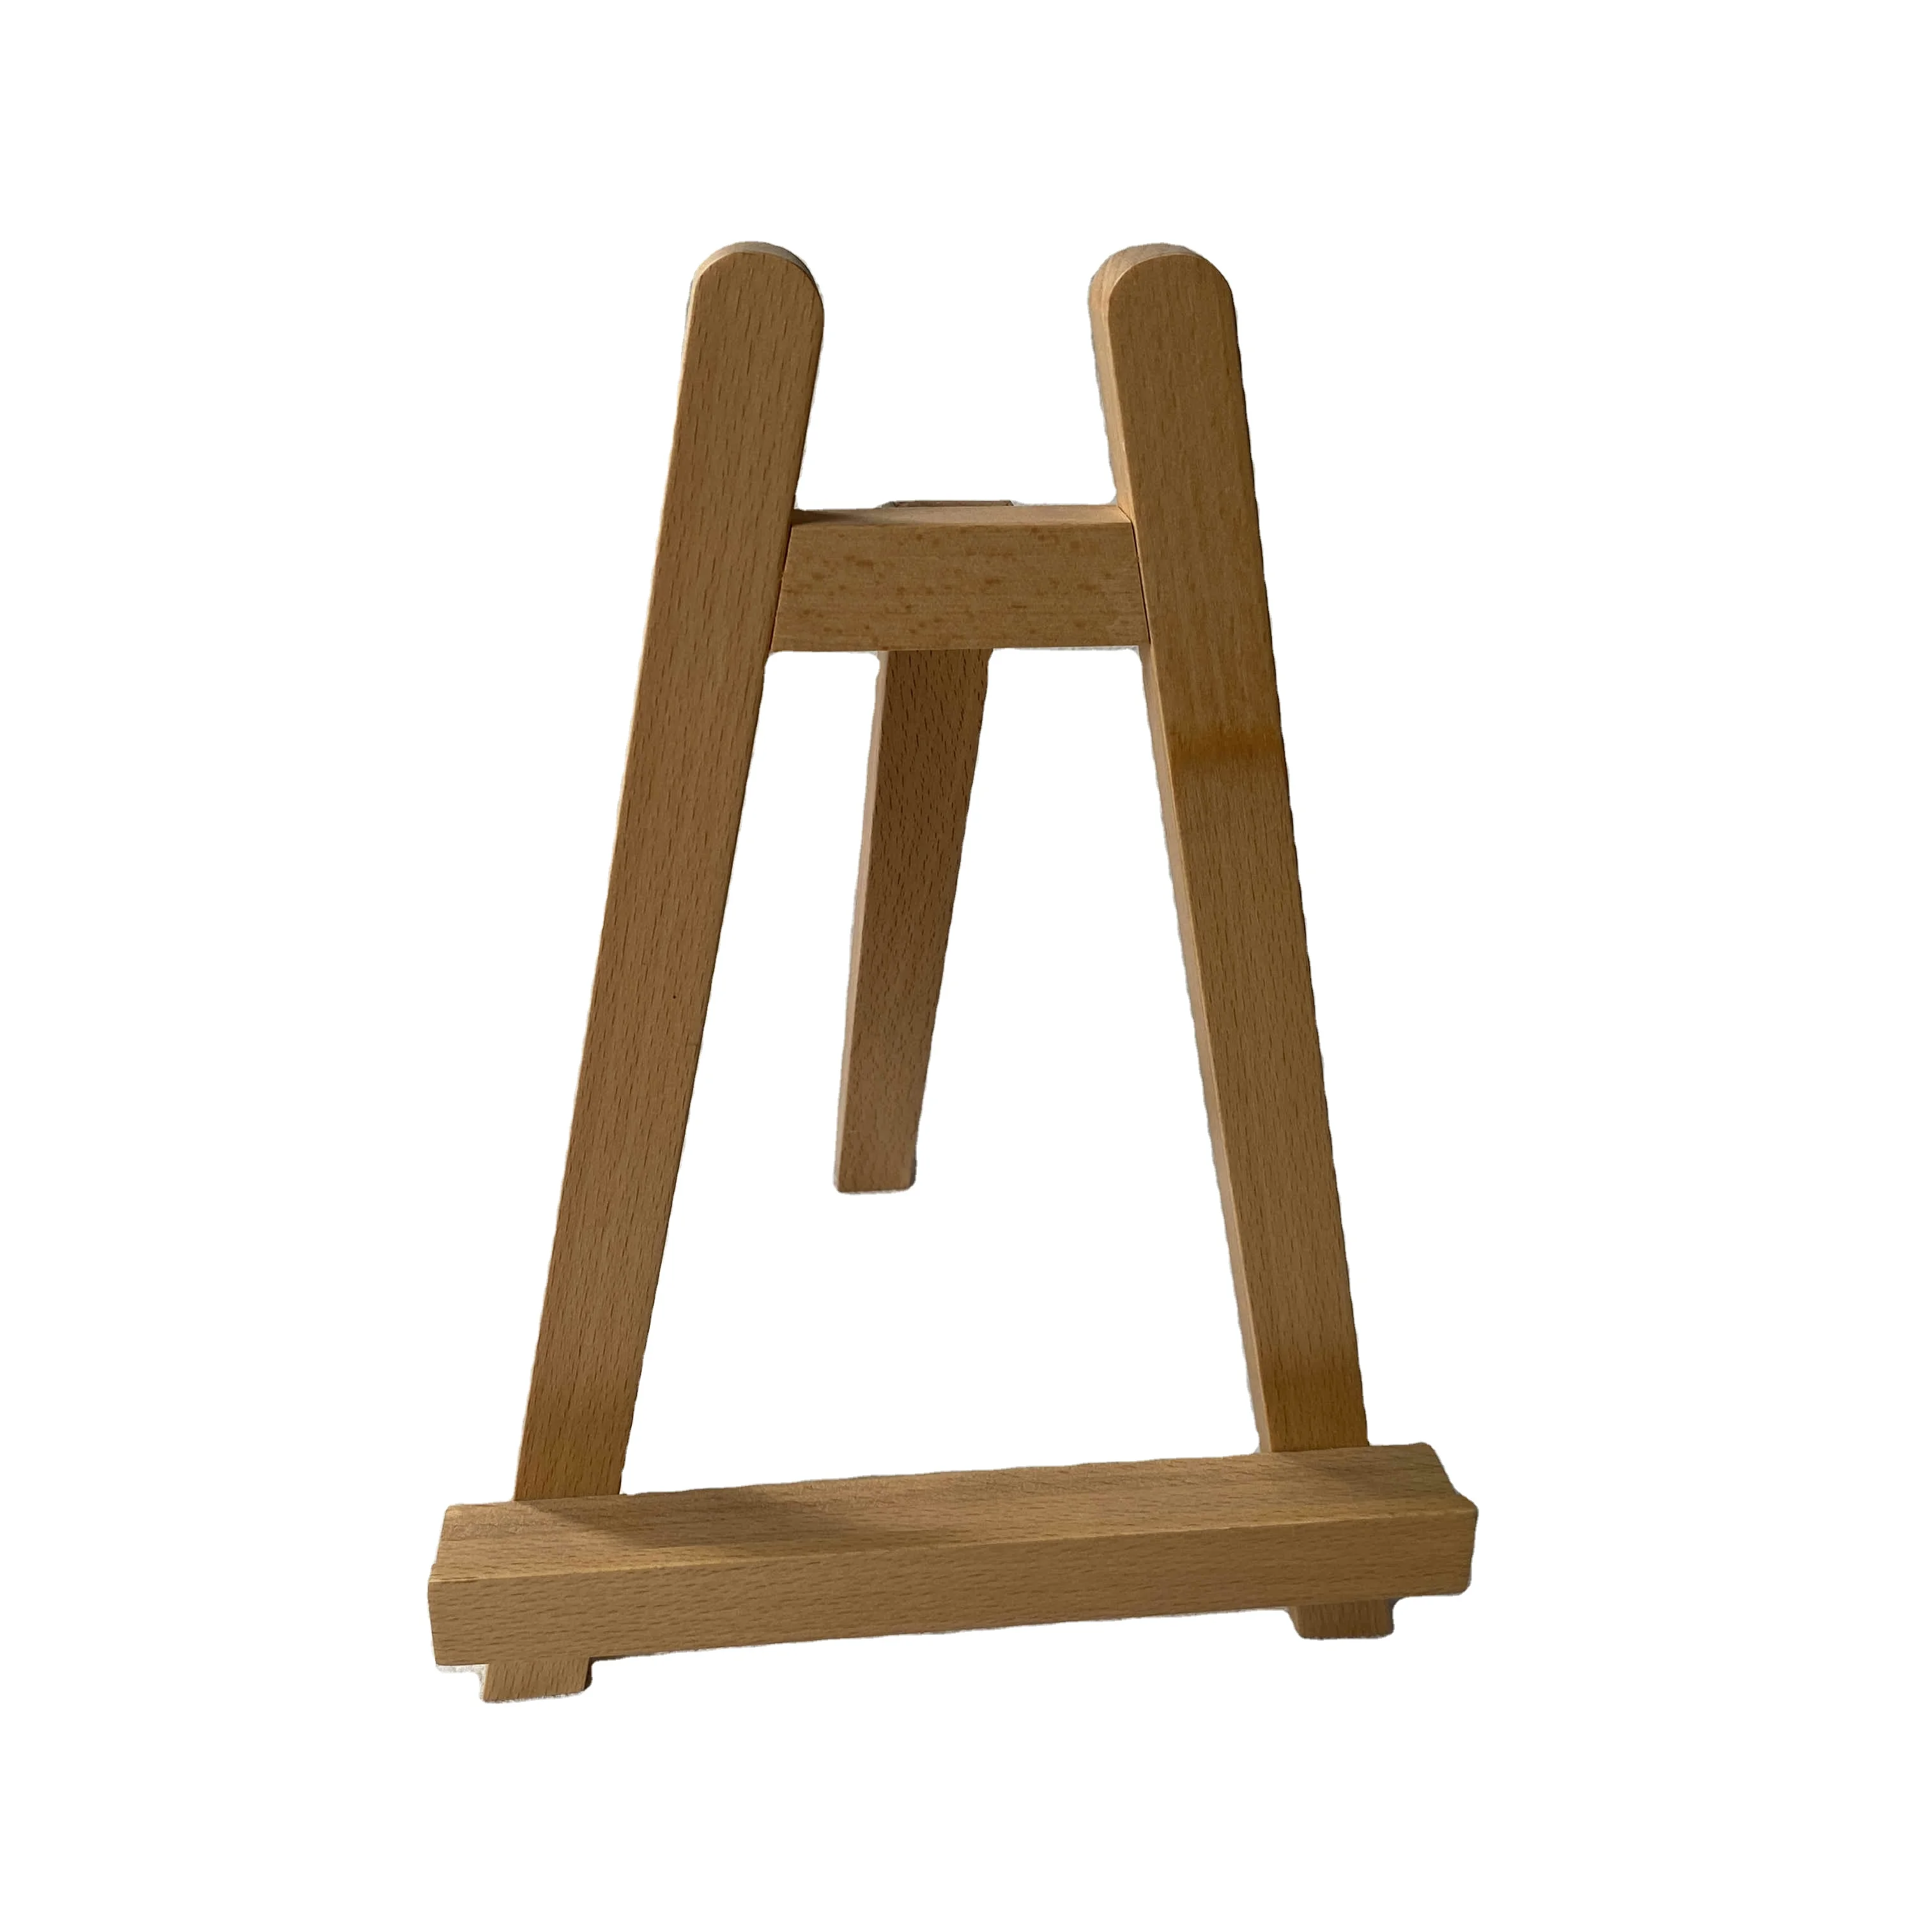 Small Tabletop Display Stand A-Frame Artist Easel - Beechwood Tripod Kids Student Classroom School Painting Party Table Desktop